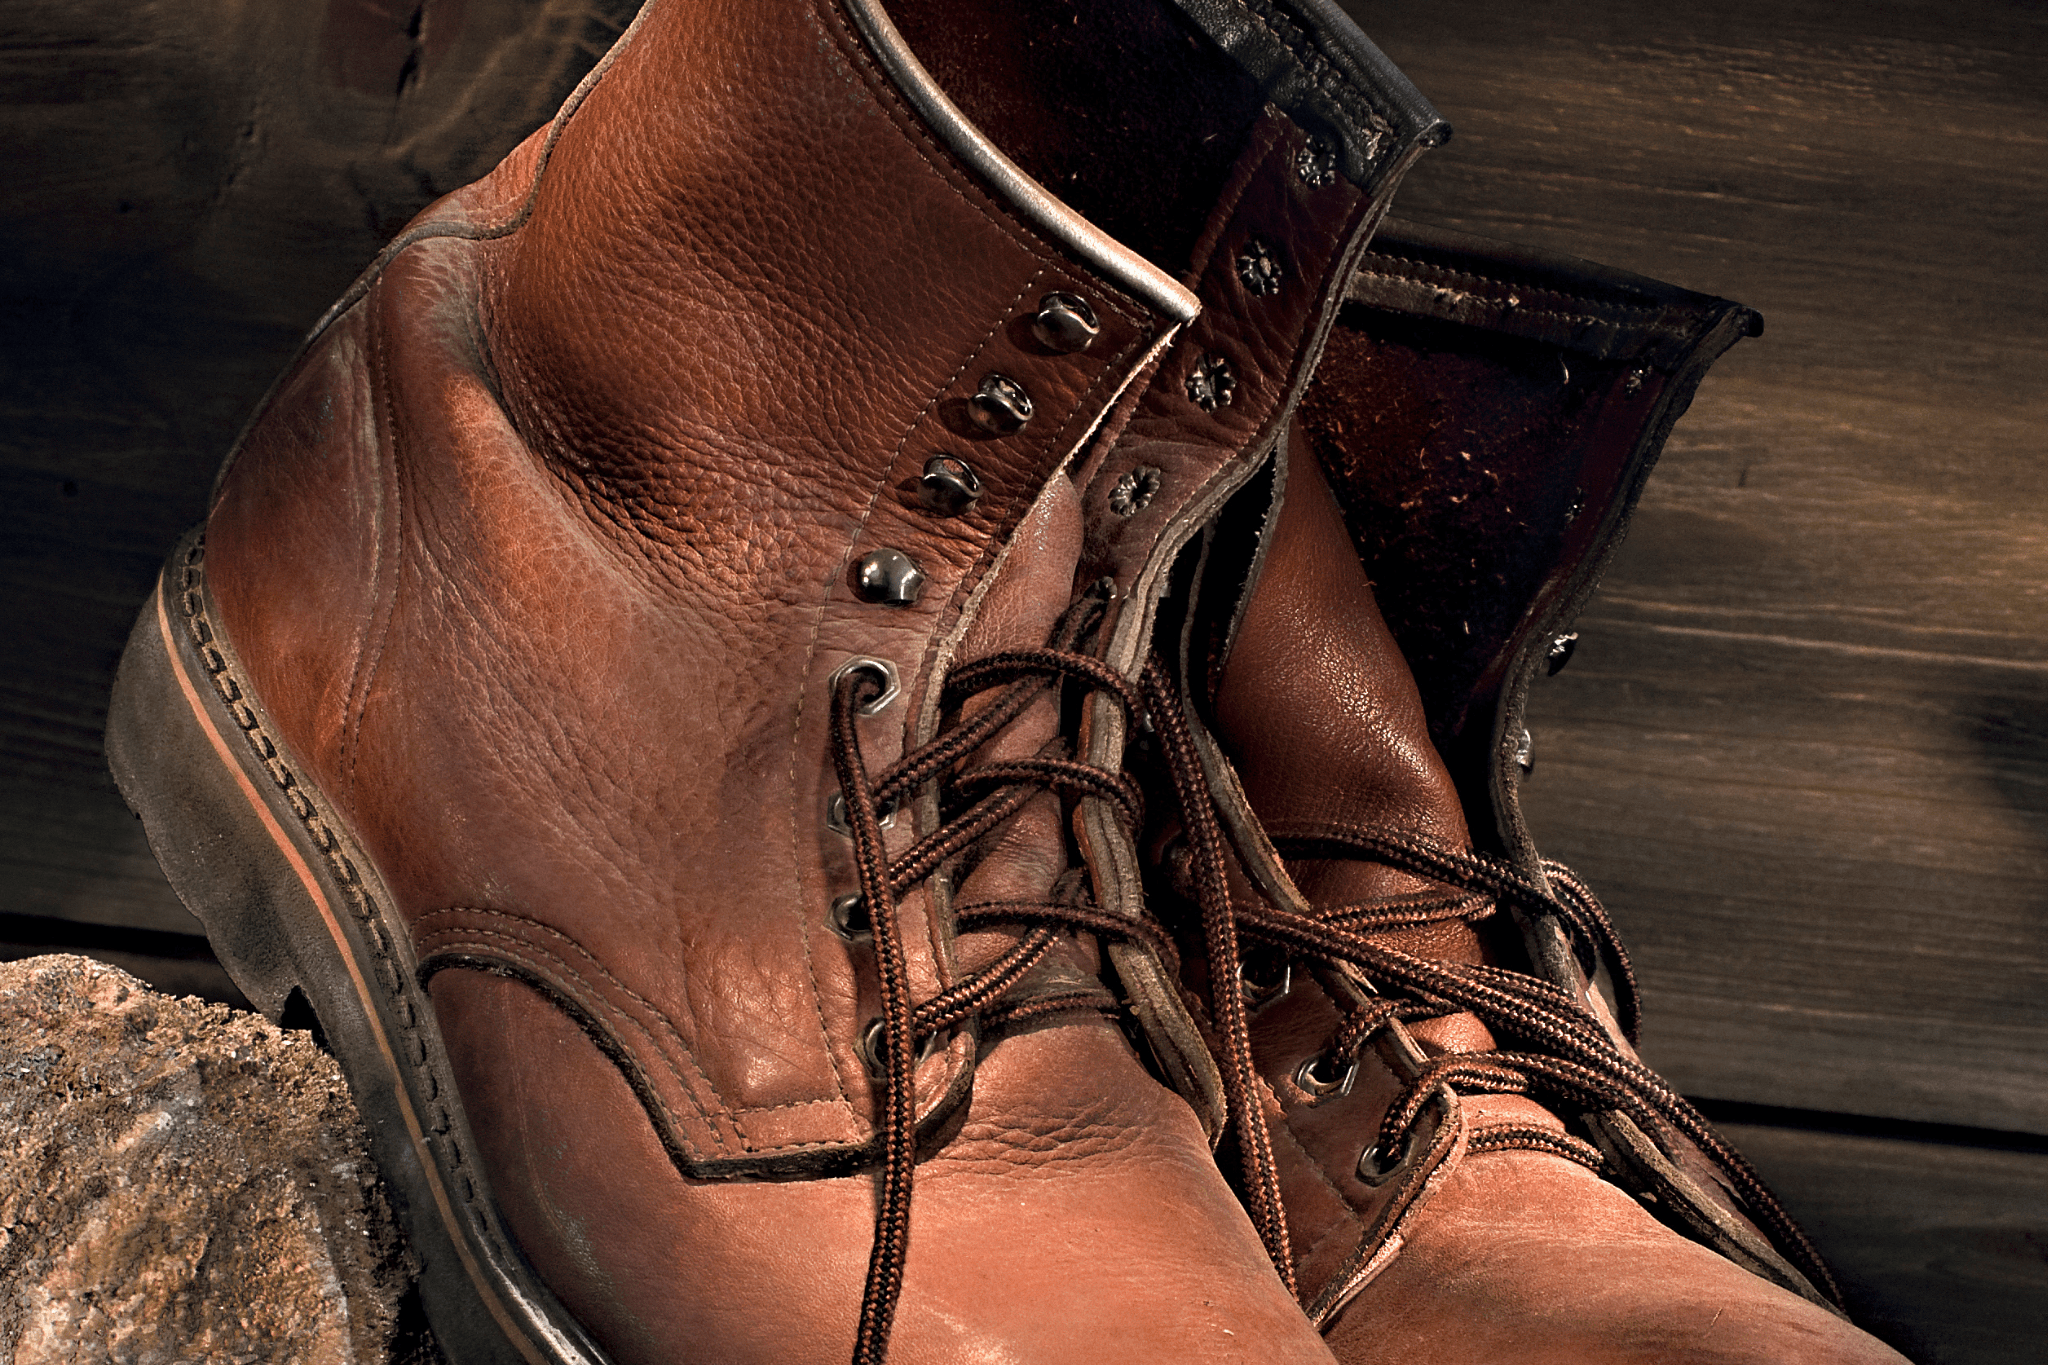 Why Steel Toes Are Uncomfortable And How To Make Them Better